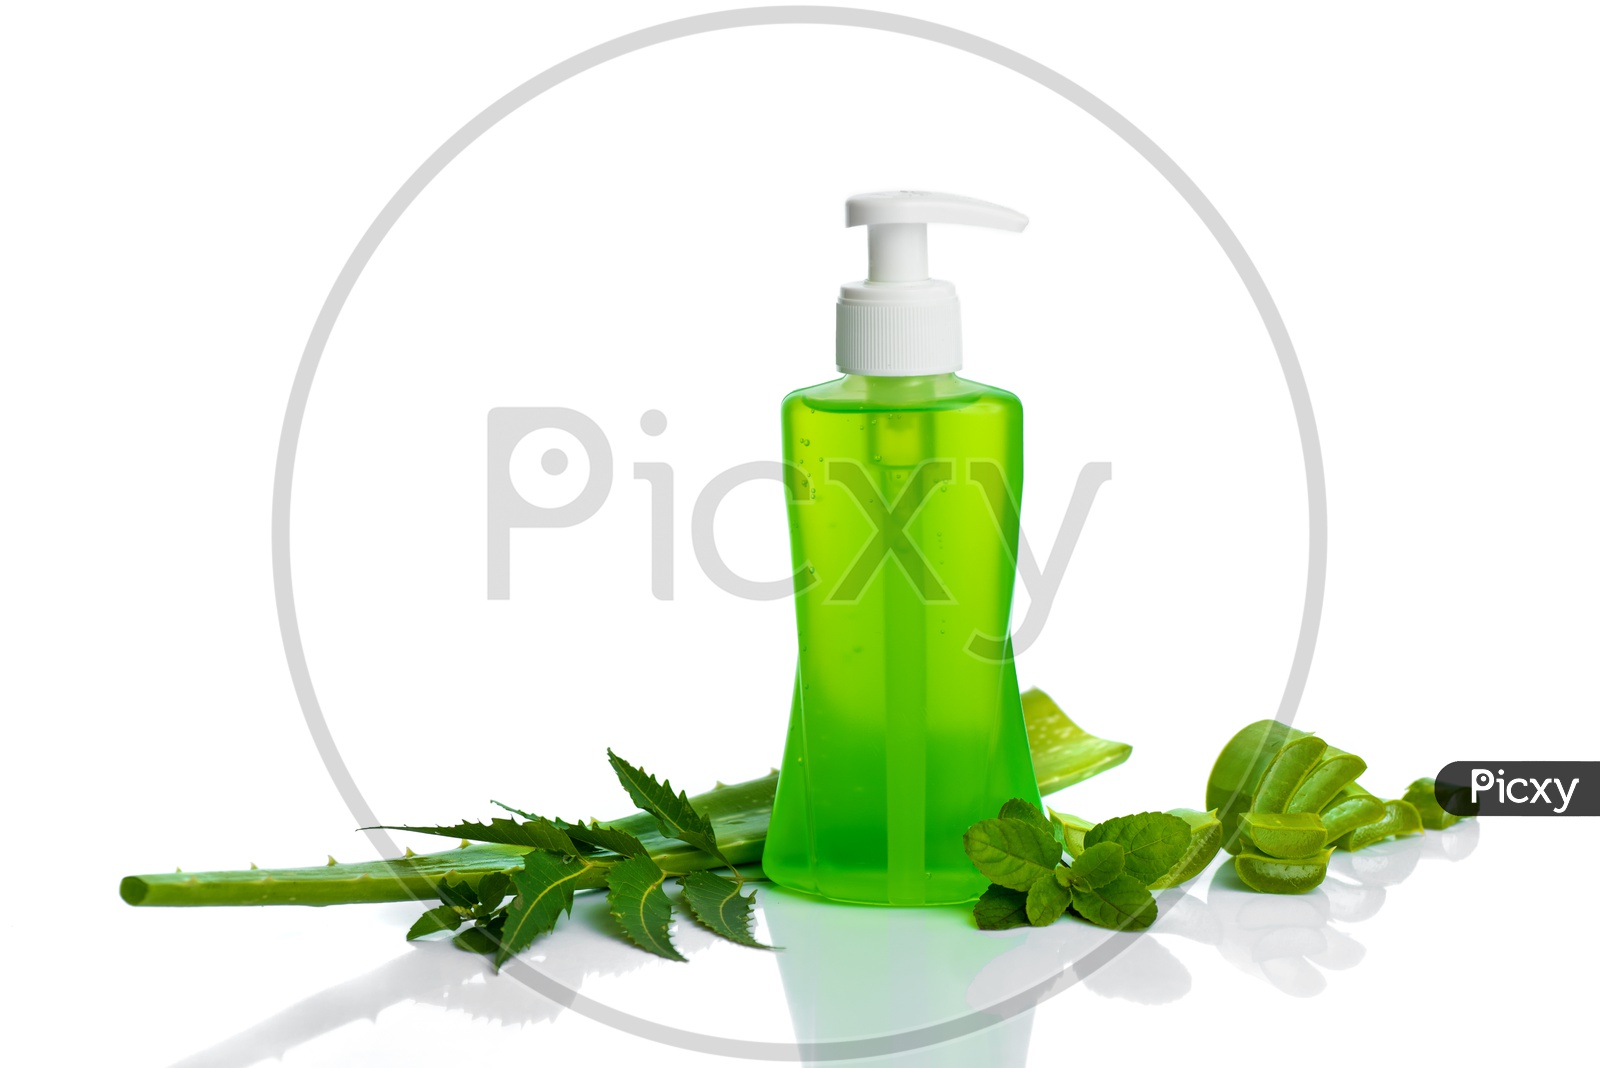 A Bottle Of Liquid Soap Or Face wash Or Face Cream Dispenser Filled With Aloe Vera  Gel  Along With Aloe Vera Slices And Neem Leafs  on an Isolated White Background